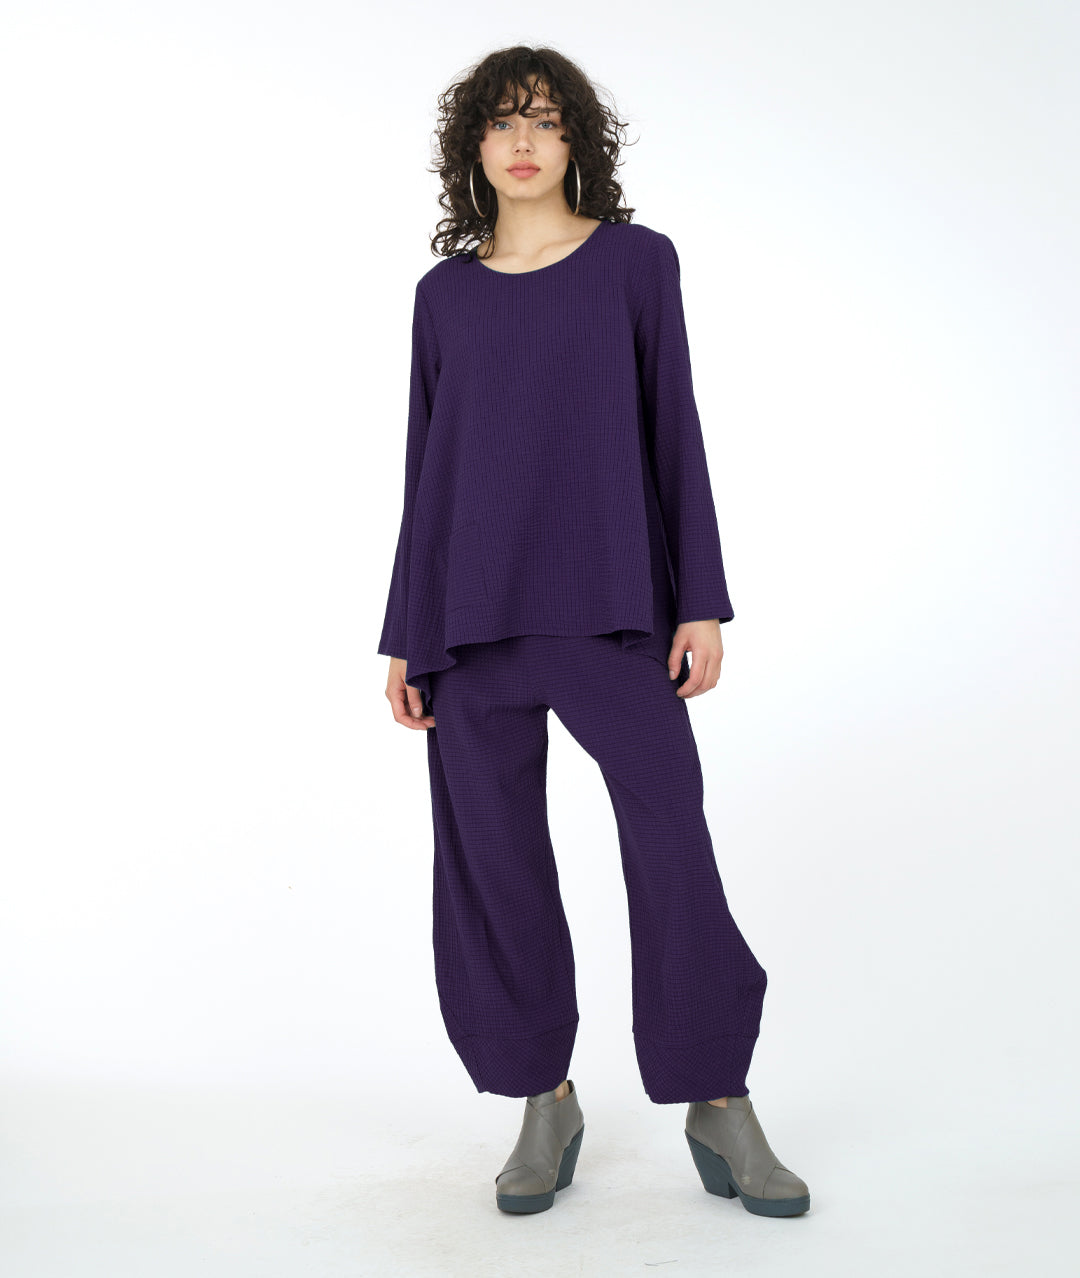 model in a dark purple full bodied pull over with a single square pocket at the hip, in a matching wide leg pant 